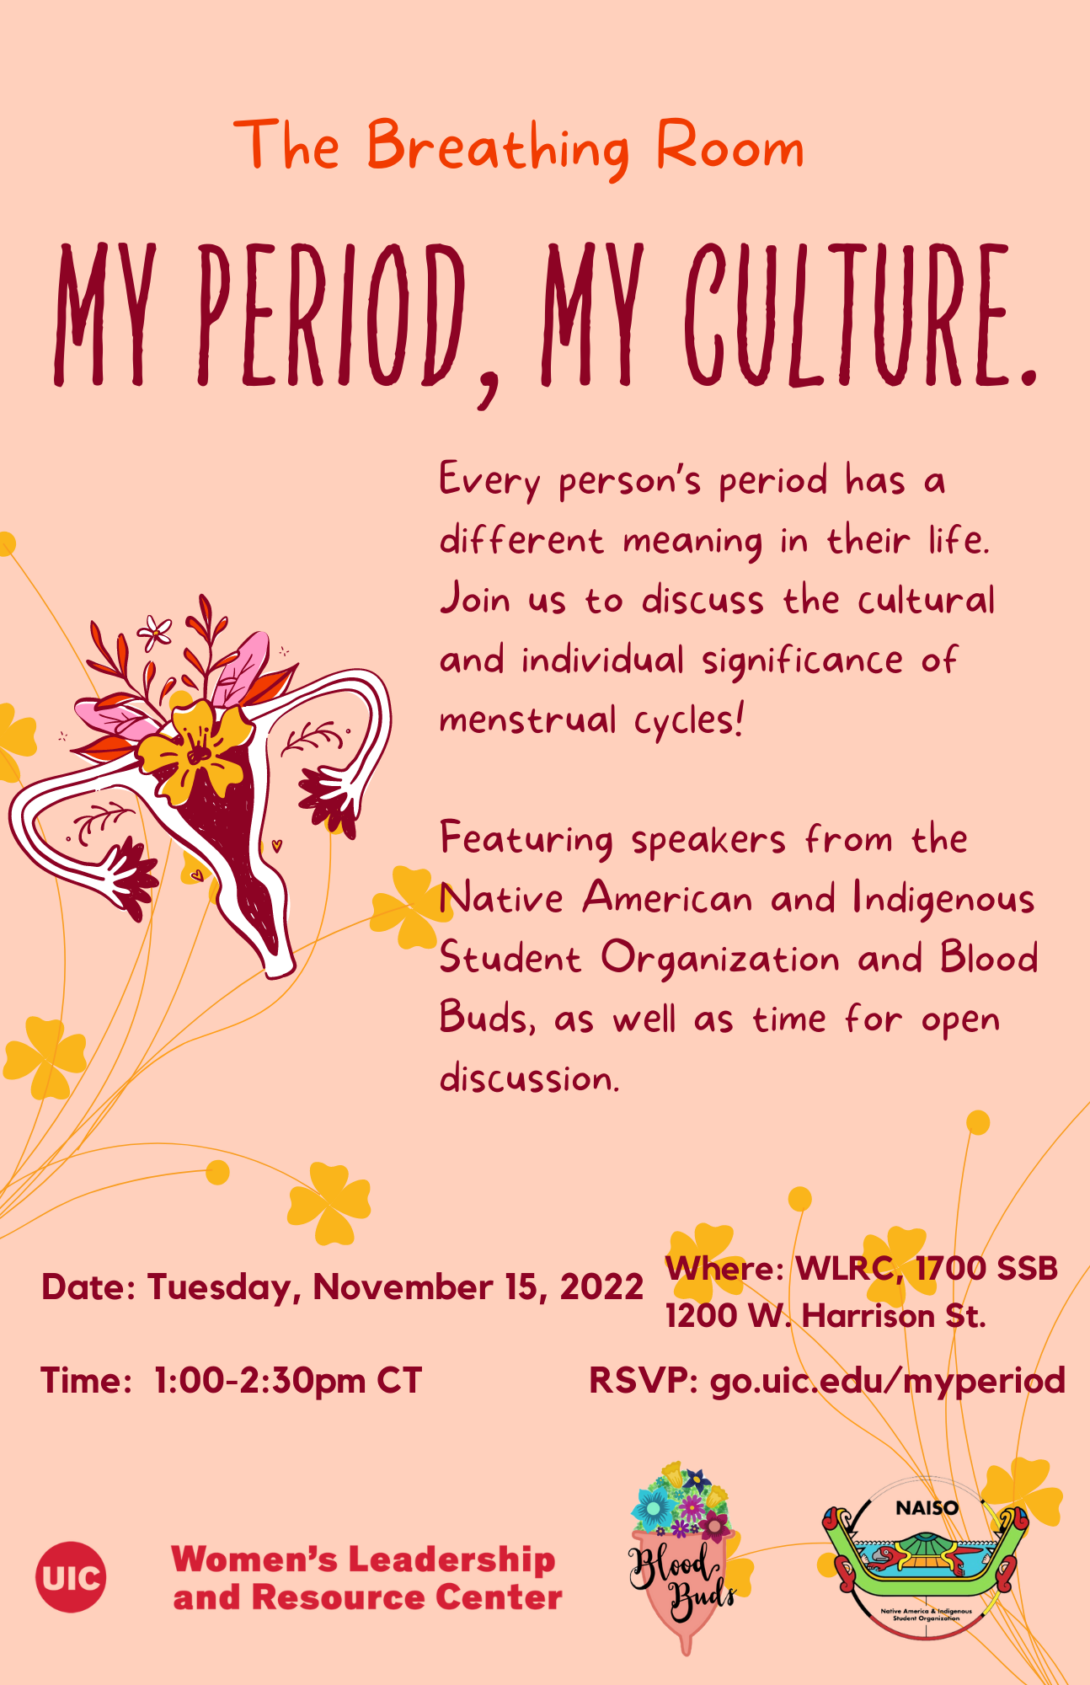 A uterus and fallopian tubes with yellow, pink, and red flowers coming out the top, on a pink background with yellow wildflowers. At the top is the title of the event in orange and red text. In the middle, next to the uterus, is text describing the event (same text on this page). At the bottom are the co-hosting organizations' logos.